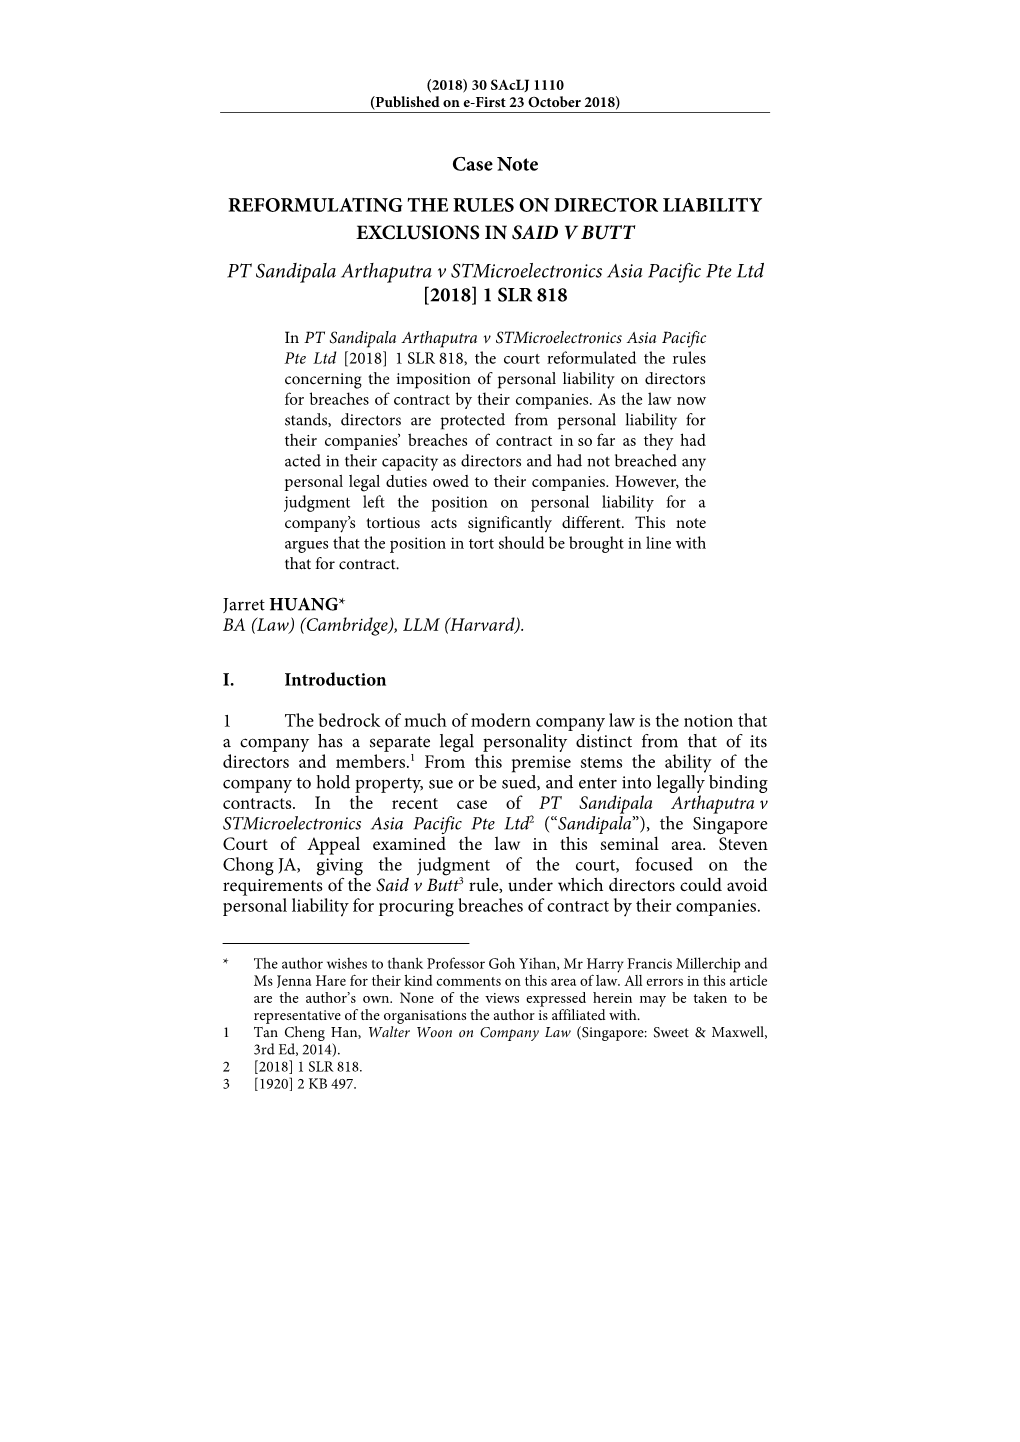 Case Note REFORMULATING the RULES on DIRECTOR LIABILITY EXCLUSIONS in SAID V BUTT PT Sandipala Arthaputra V Stmicroelectronics Asia Pacific Pte Ltd [2018] 1 SLR 818